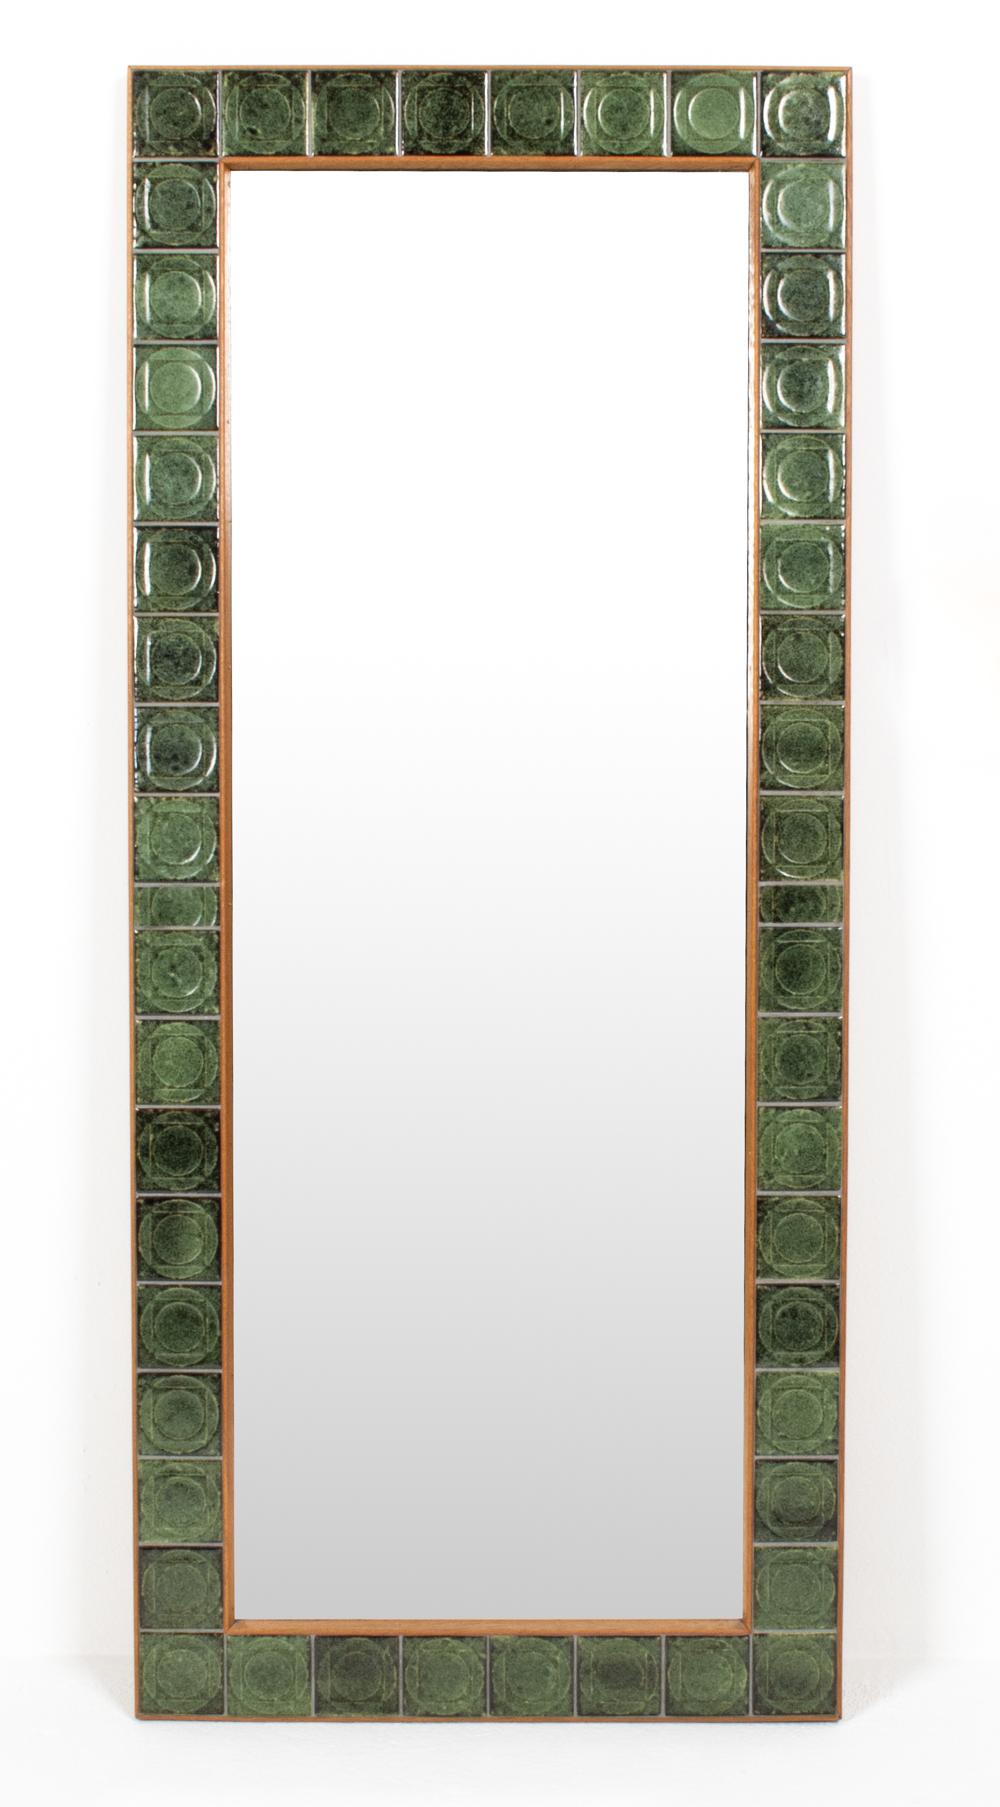 A stunning Danish mid-century wall mirror with a matching shelf in blonde oak wood, both with gorgeous sea-toned green flecked and impressed ceramic tiles, in the manner of Danish designer Bodil Eje (1931 - 2006). A fabulous way to coordinate a